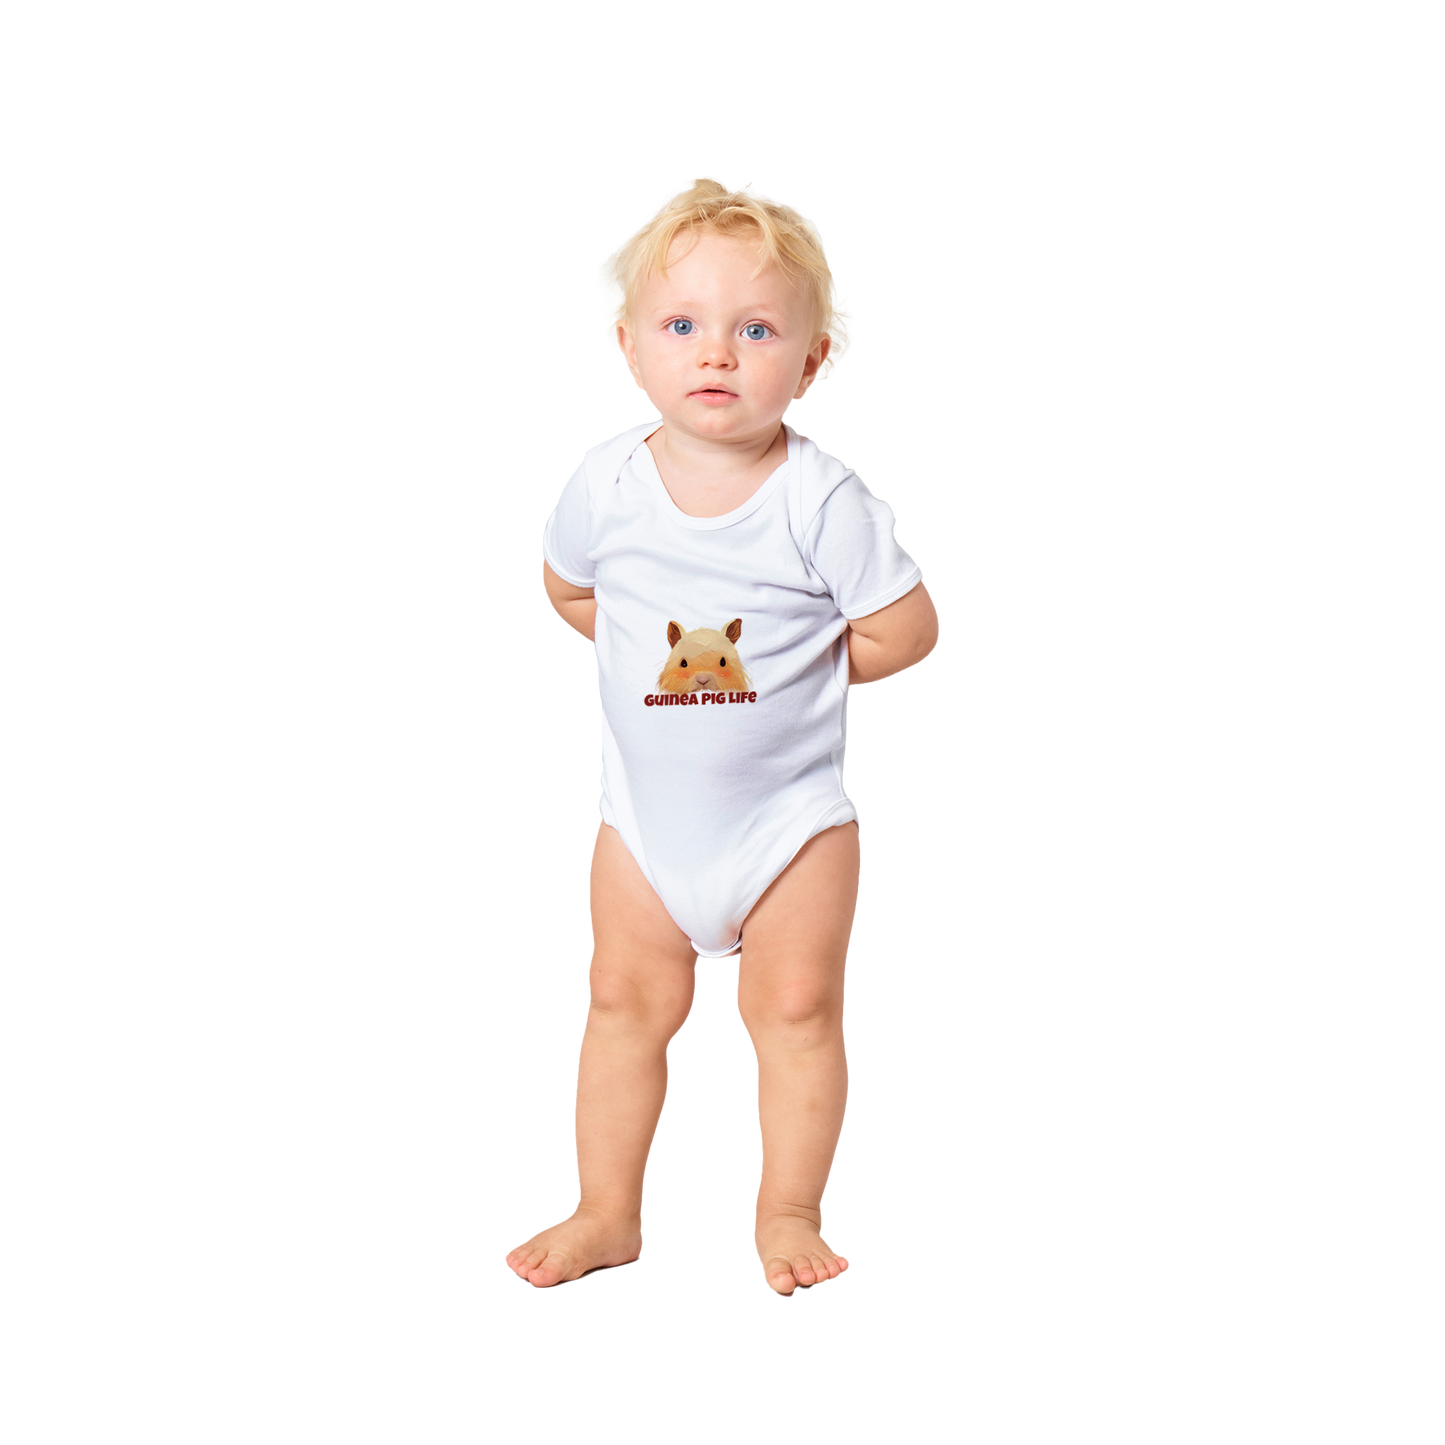 Baby wearing White short sleeve baby onesie with cute Guinea Pig life print